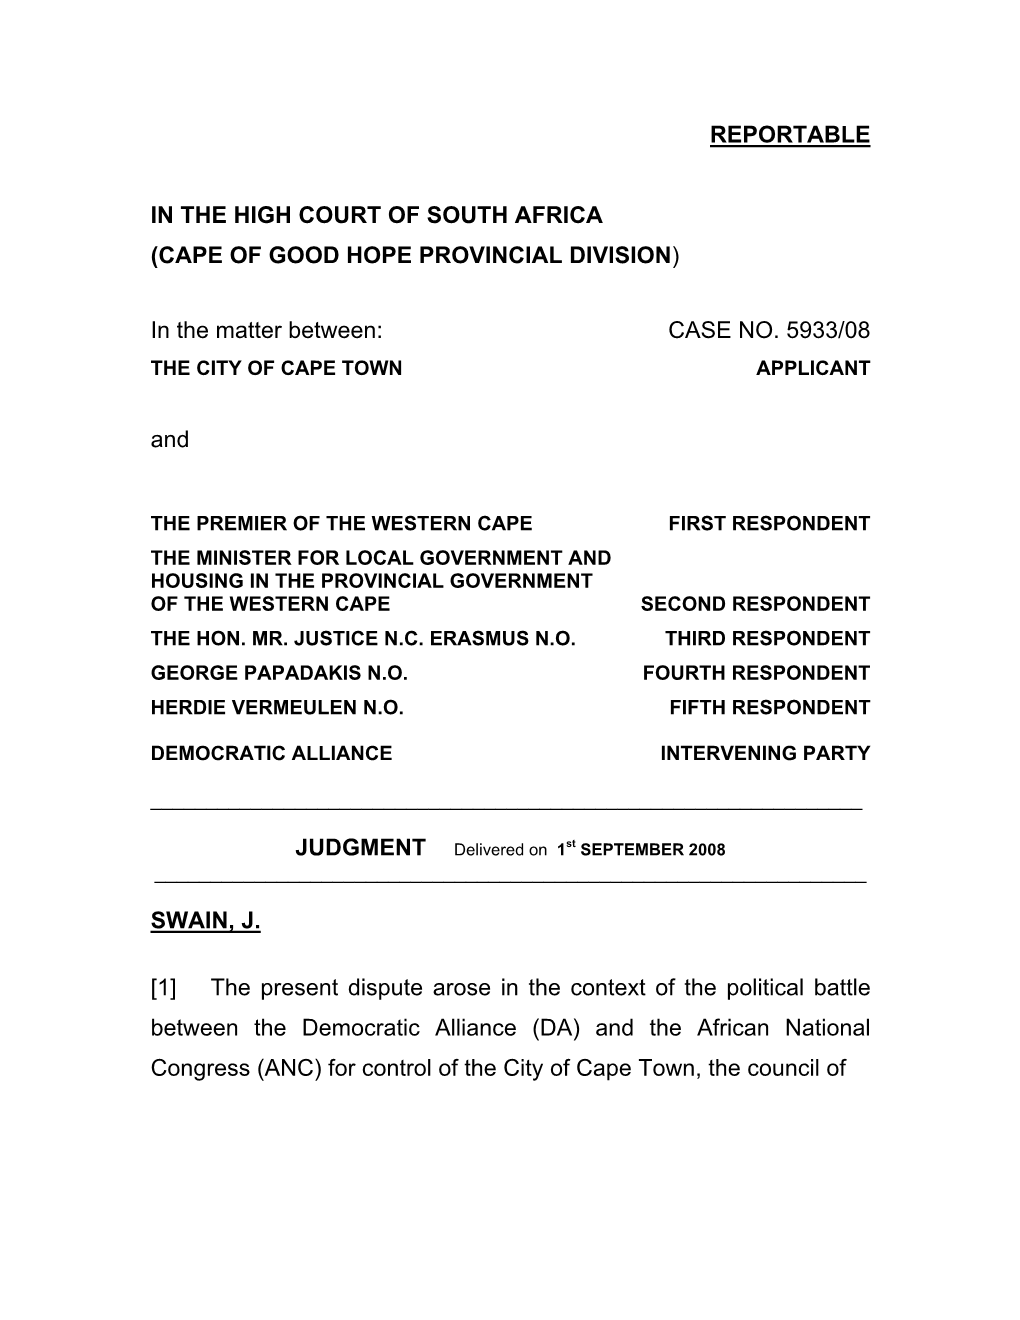 REPORTABLE in the HIGH COURT of SOUTH AFRICA (CAPE of GOOD HOPE PROVINCIAL DIVISION) in the Matter Between: CASE NO. 5933/08 An